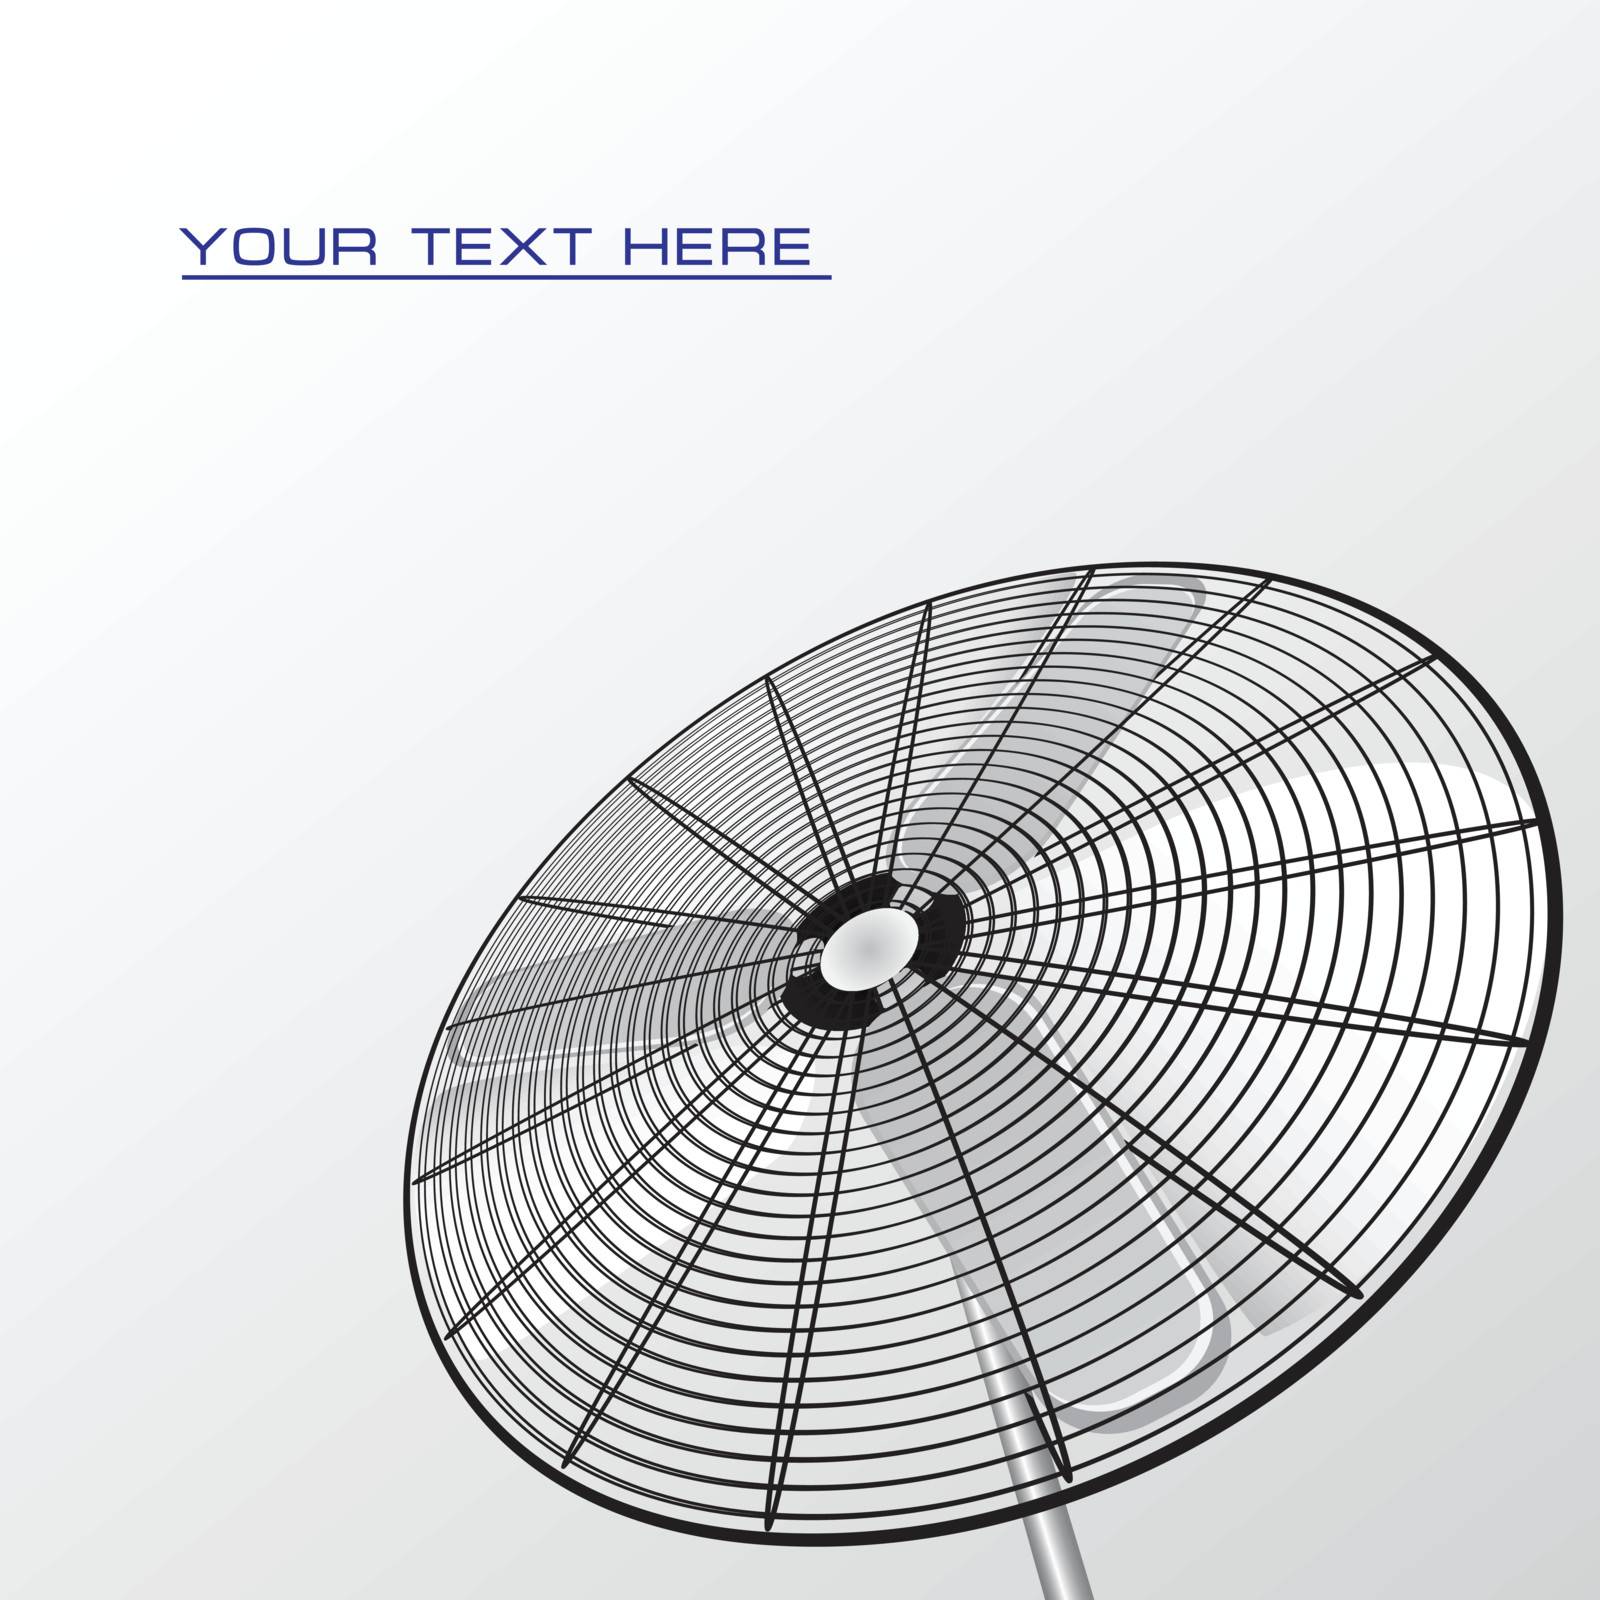 Floor home fan for home and office. Vector illustration.